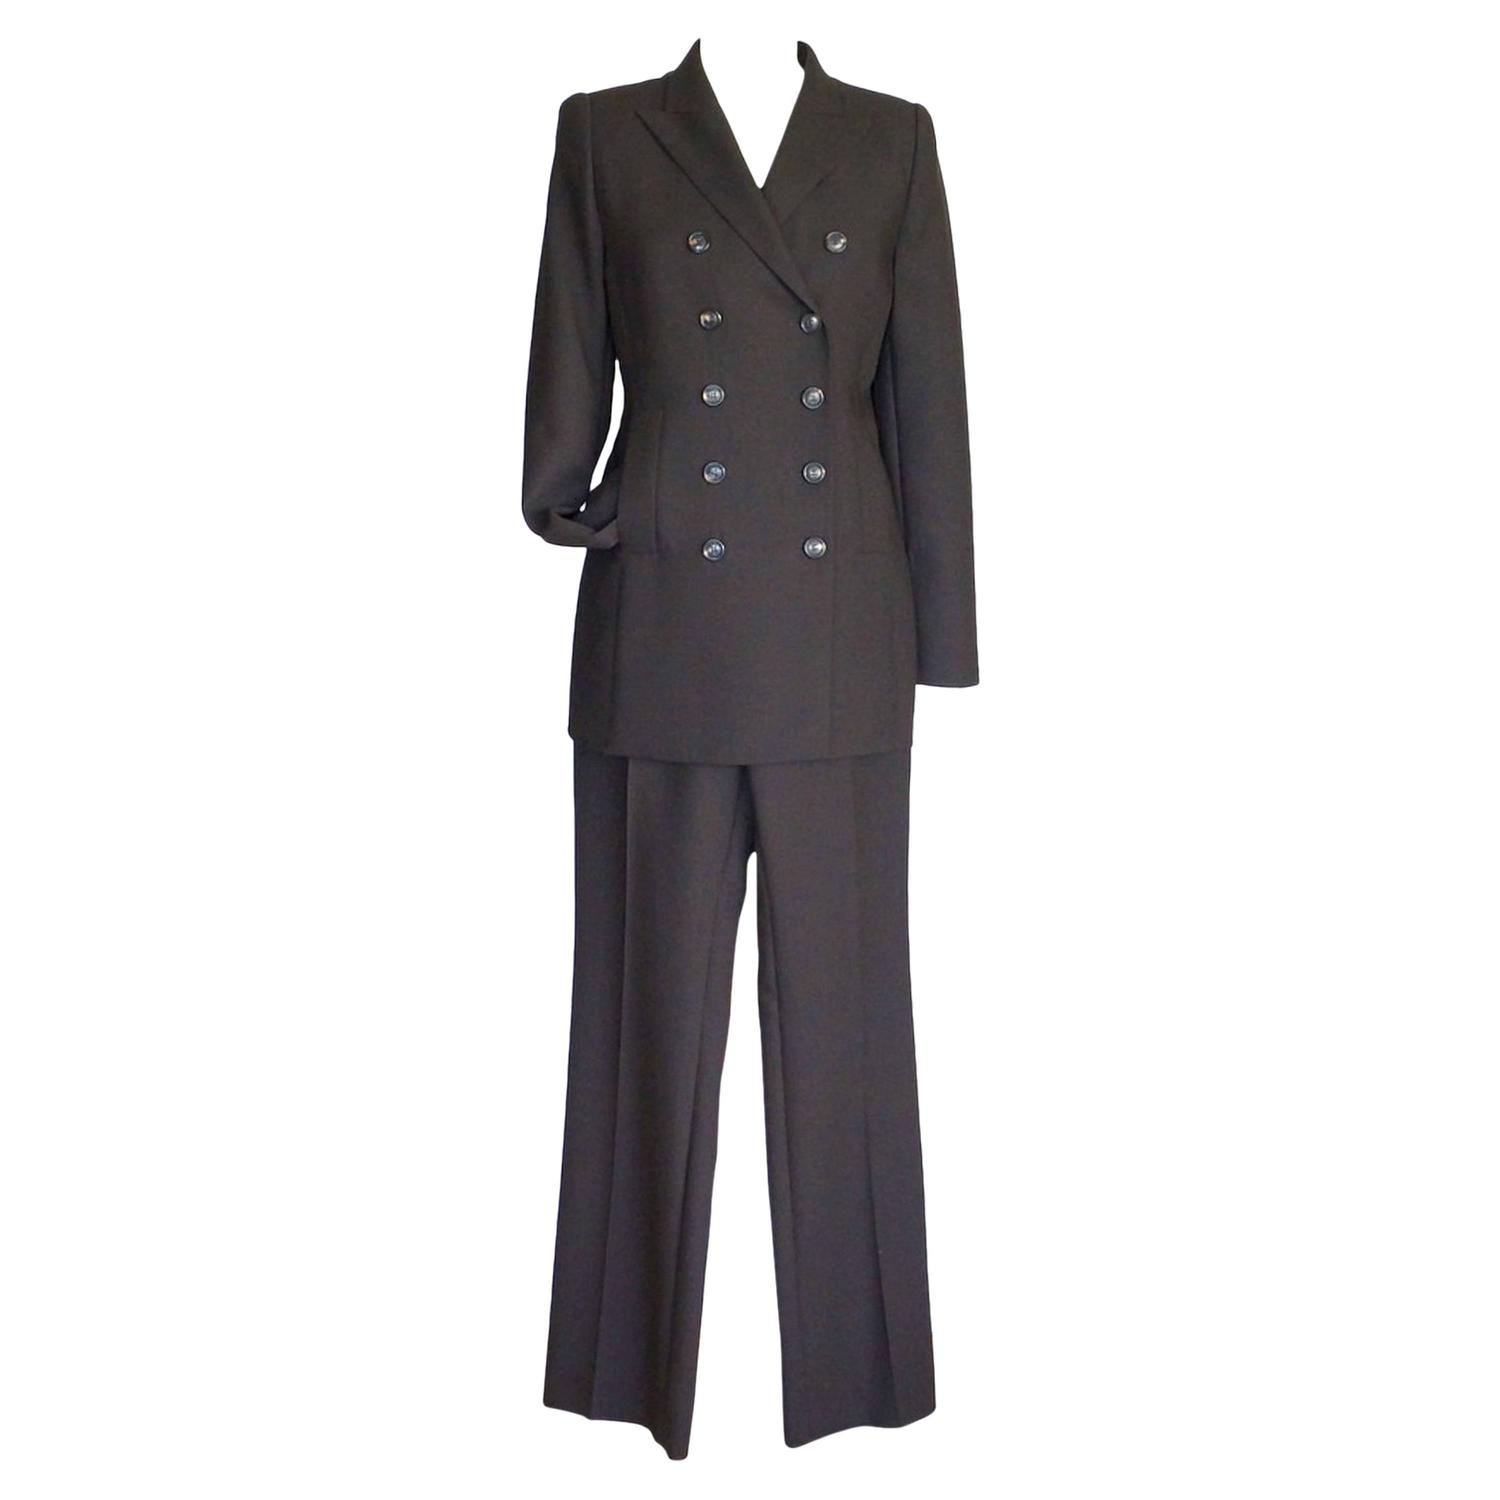 AKRIS Pant Suit Double Breast Dark Brown 10 New For Sale at 1stdibs